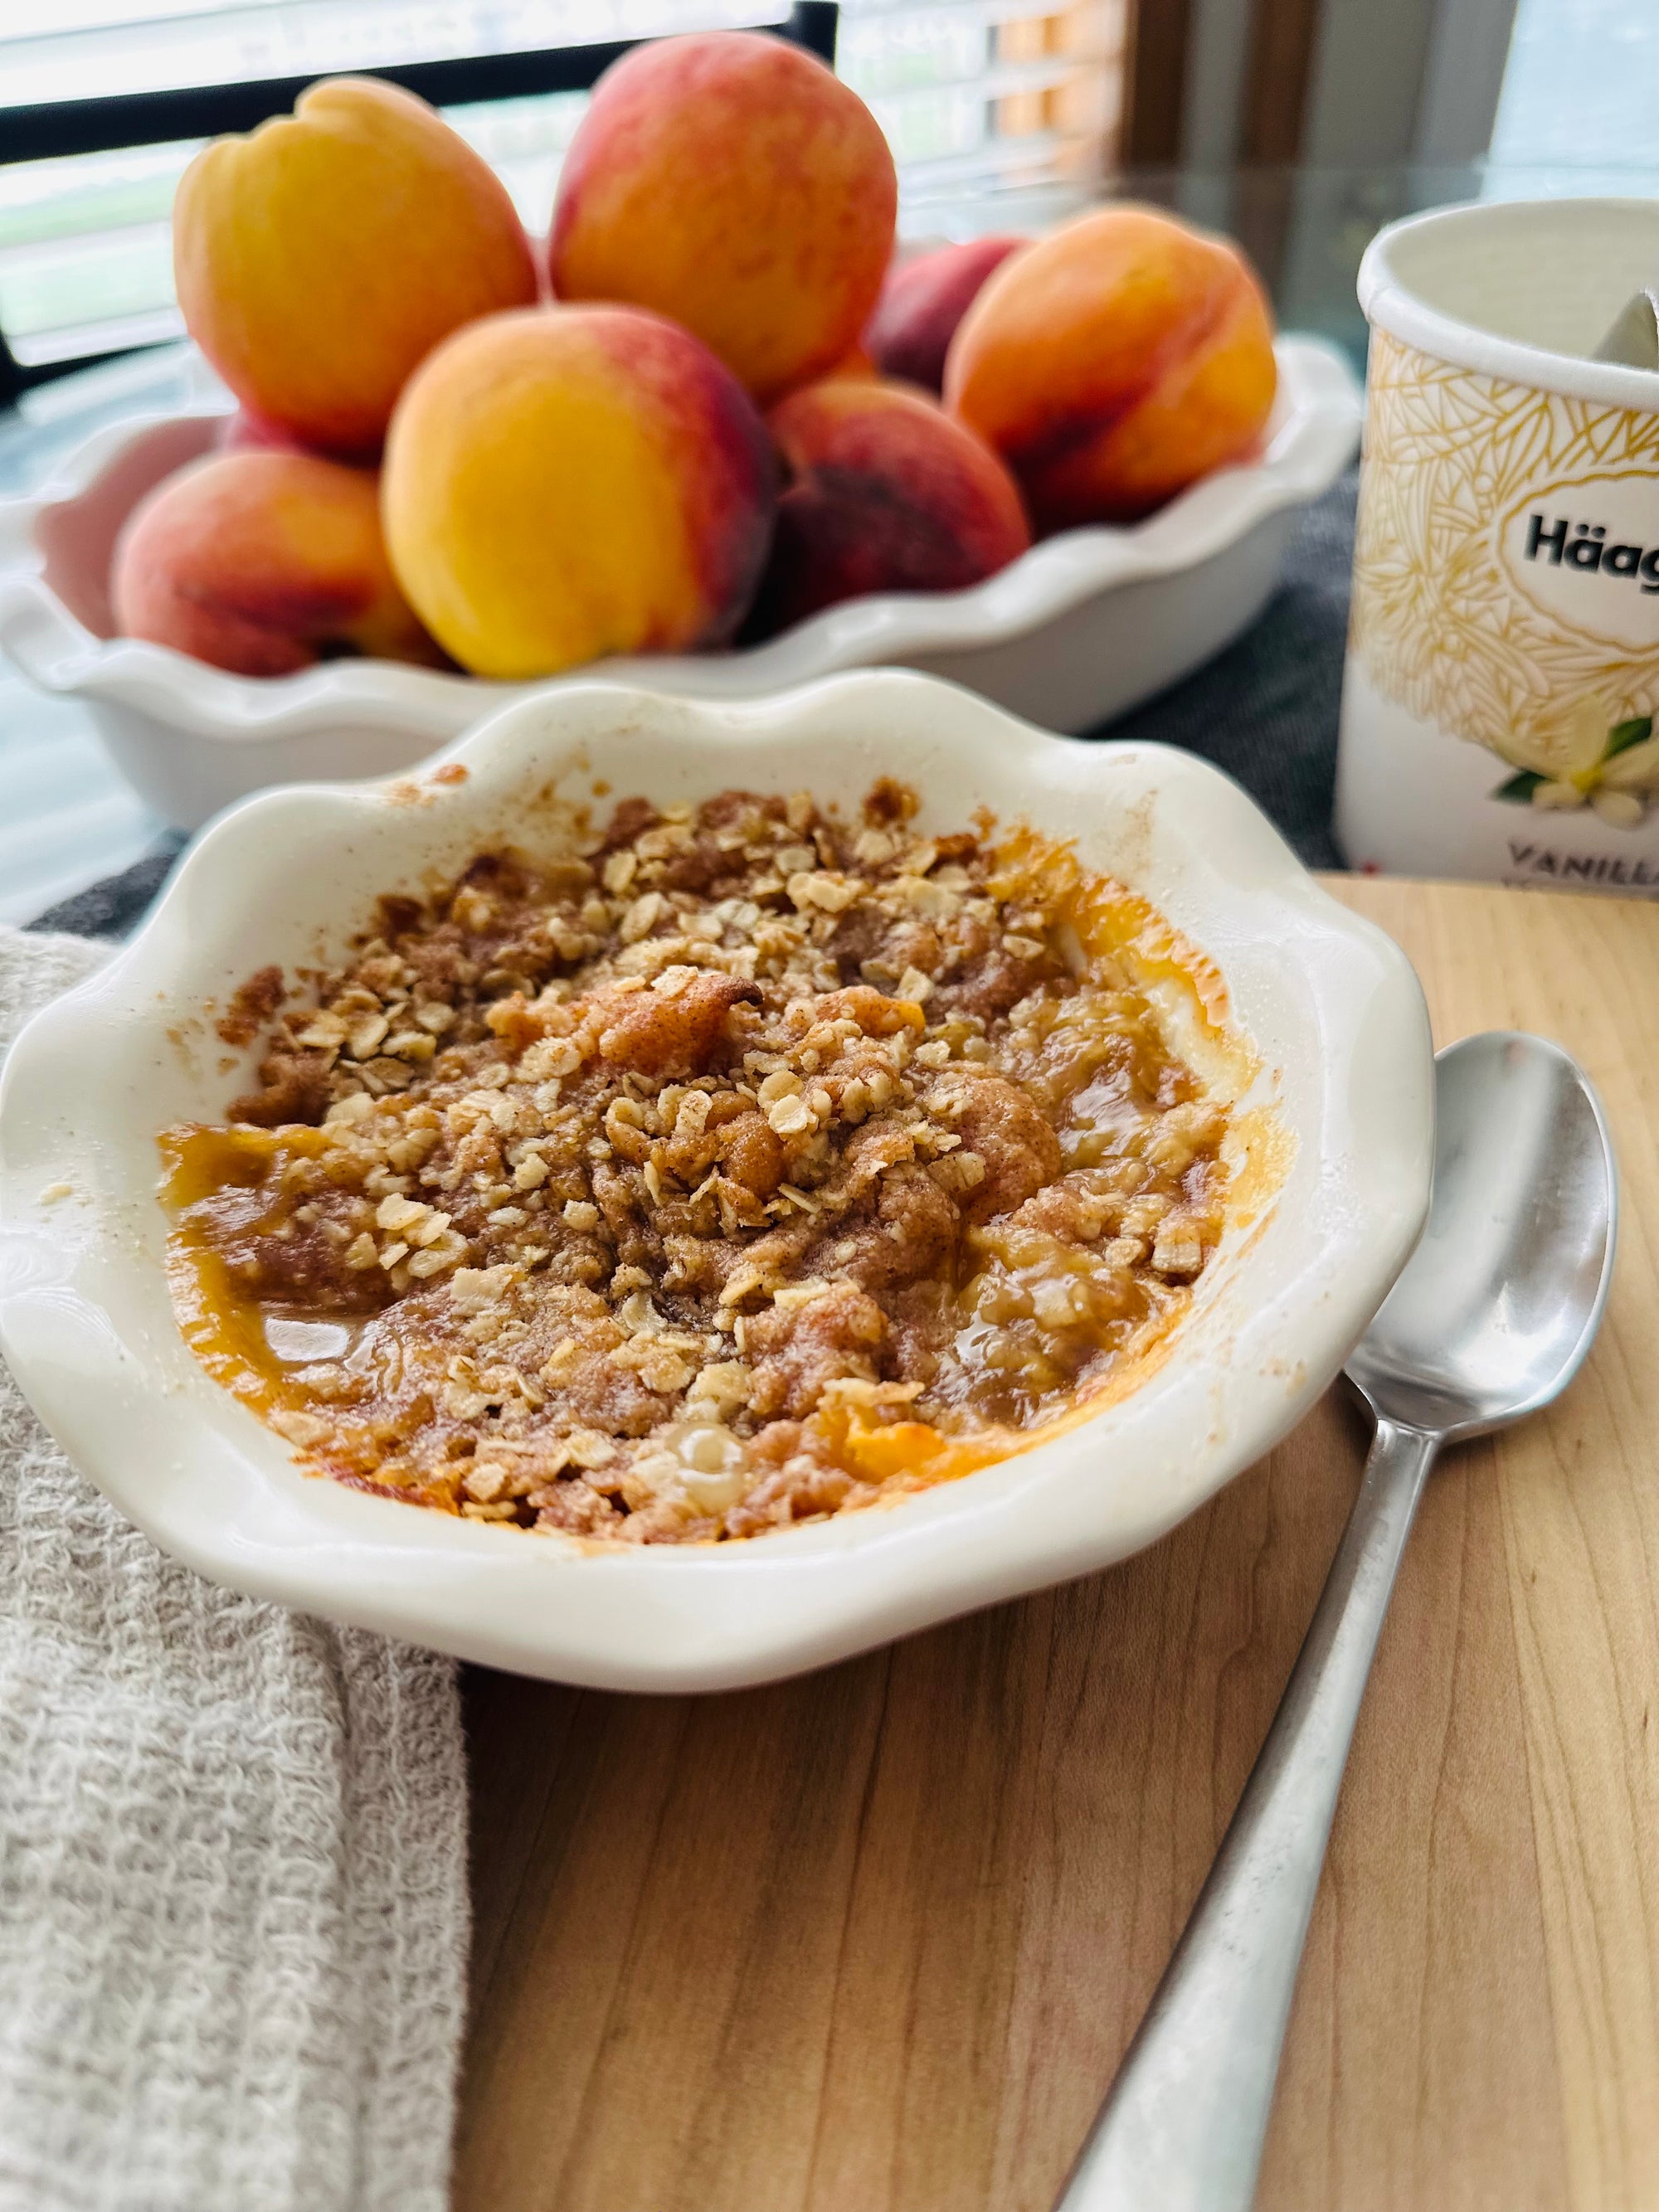 Baking up a Storm with A Juicy Peach Crisp Recipe